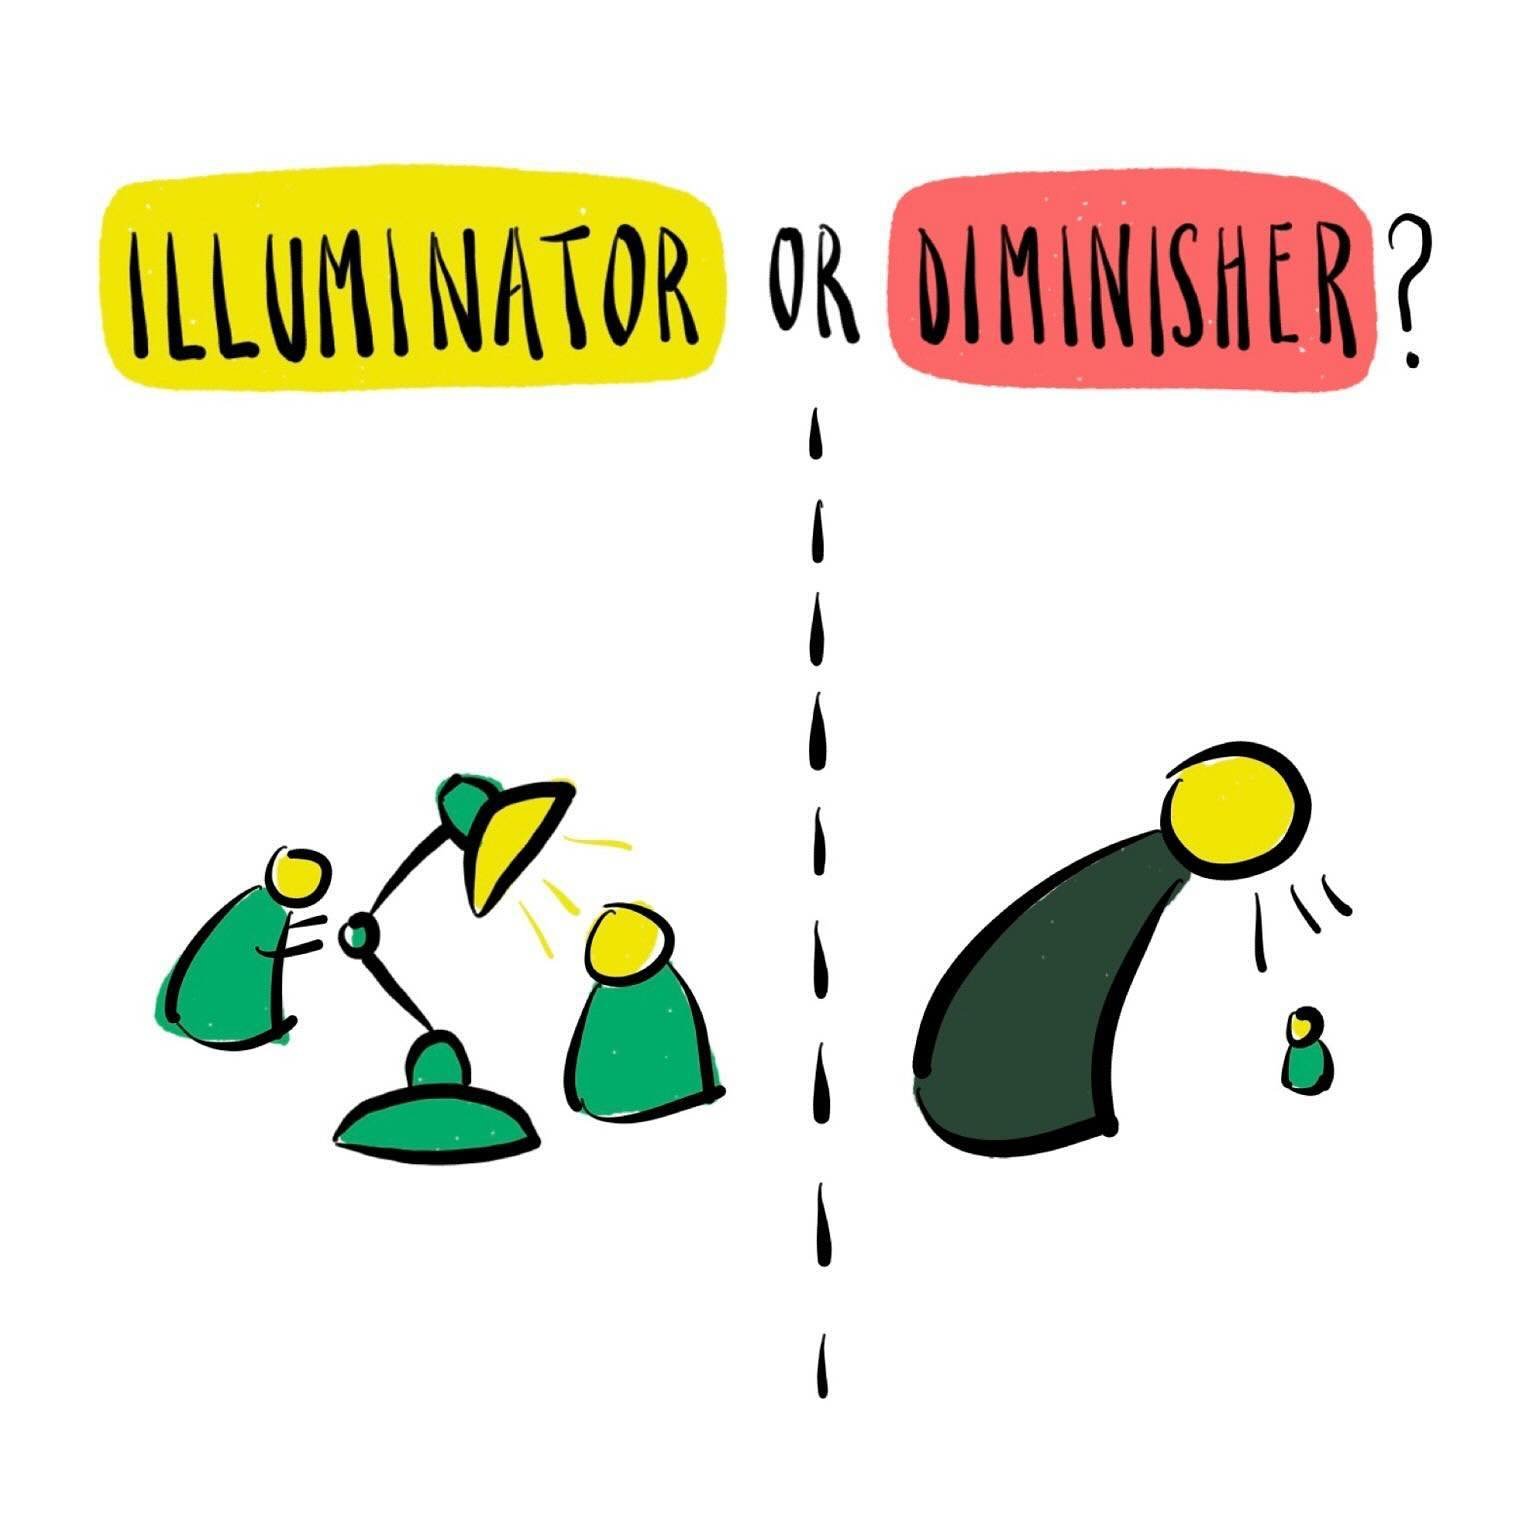 In an age of separation how do we create more connection?

Be more illuminator and less diminisher.

Illuminators:

💡 Shine a light on others
💡 Ask questions
💡 Focus outwards
💡 Are open to feedback

Diminishers:

❌ Shine a light on themselves
❌ A